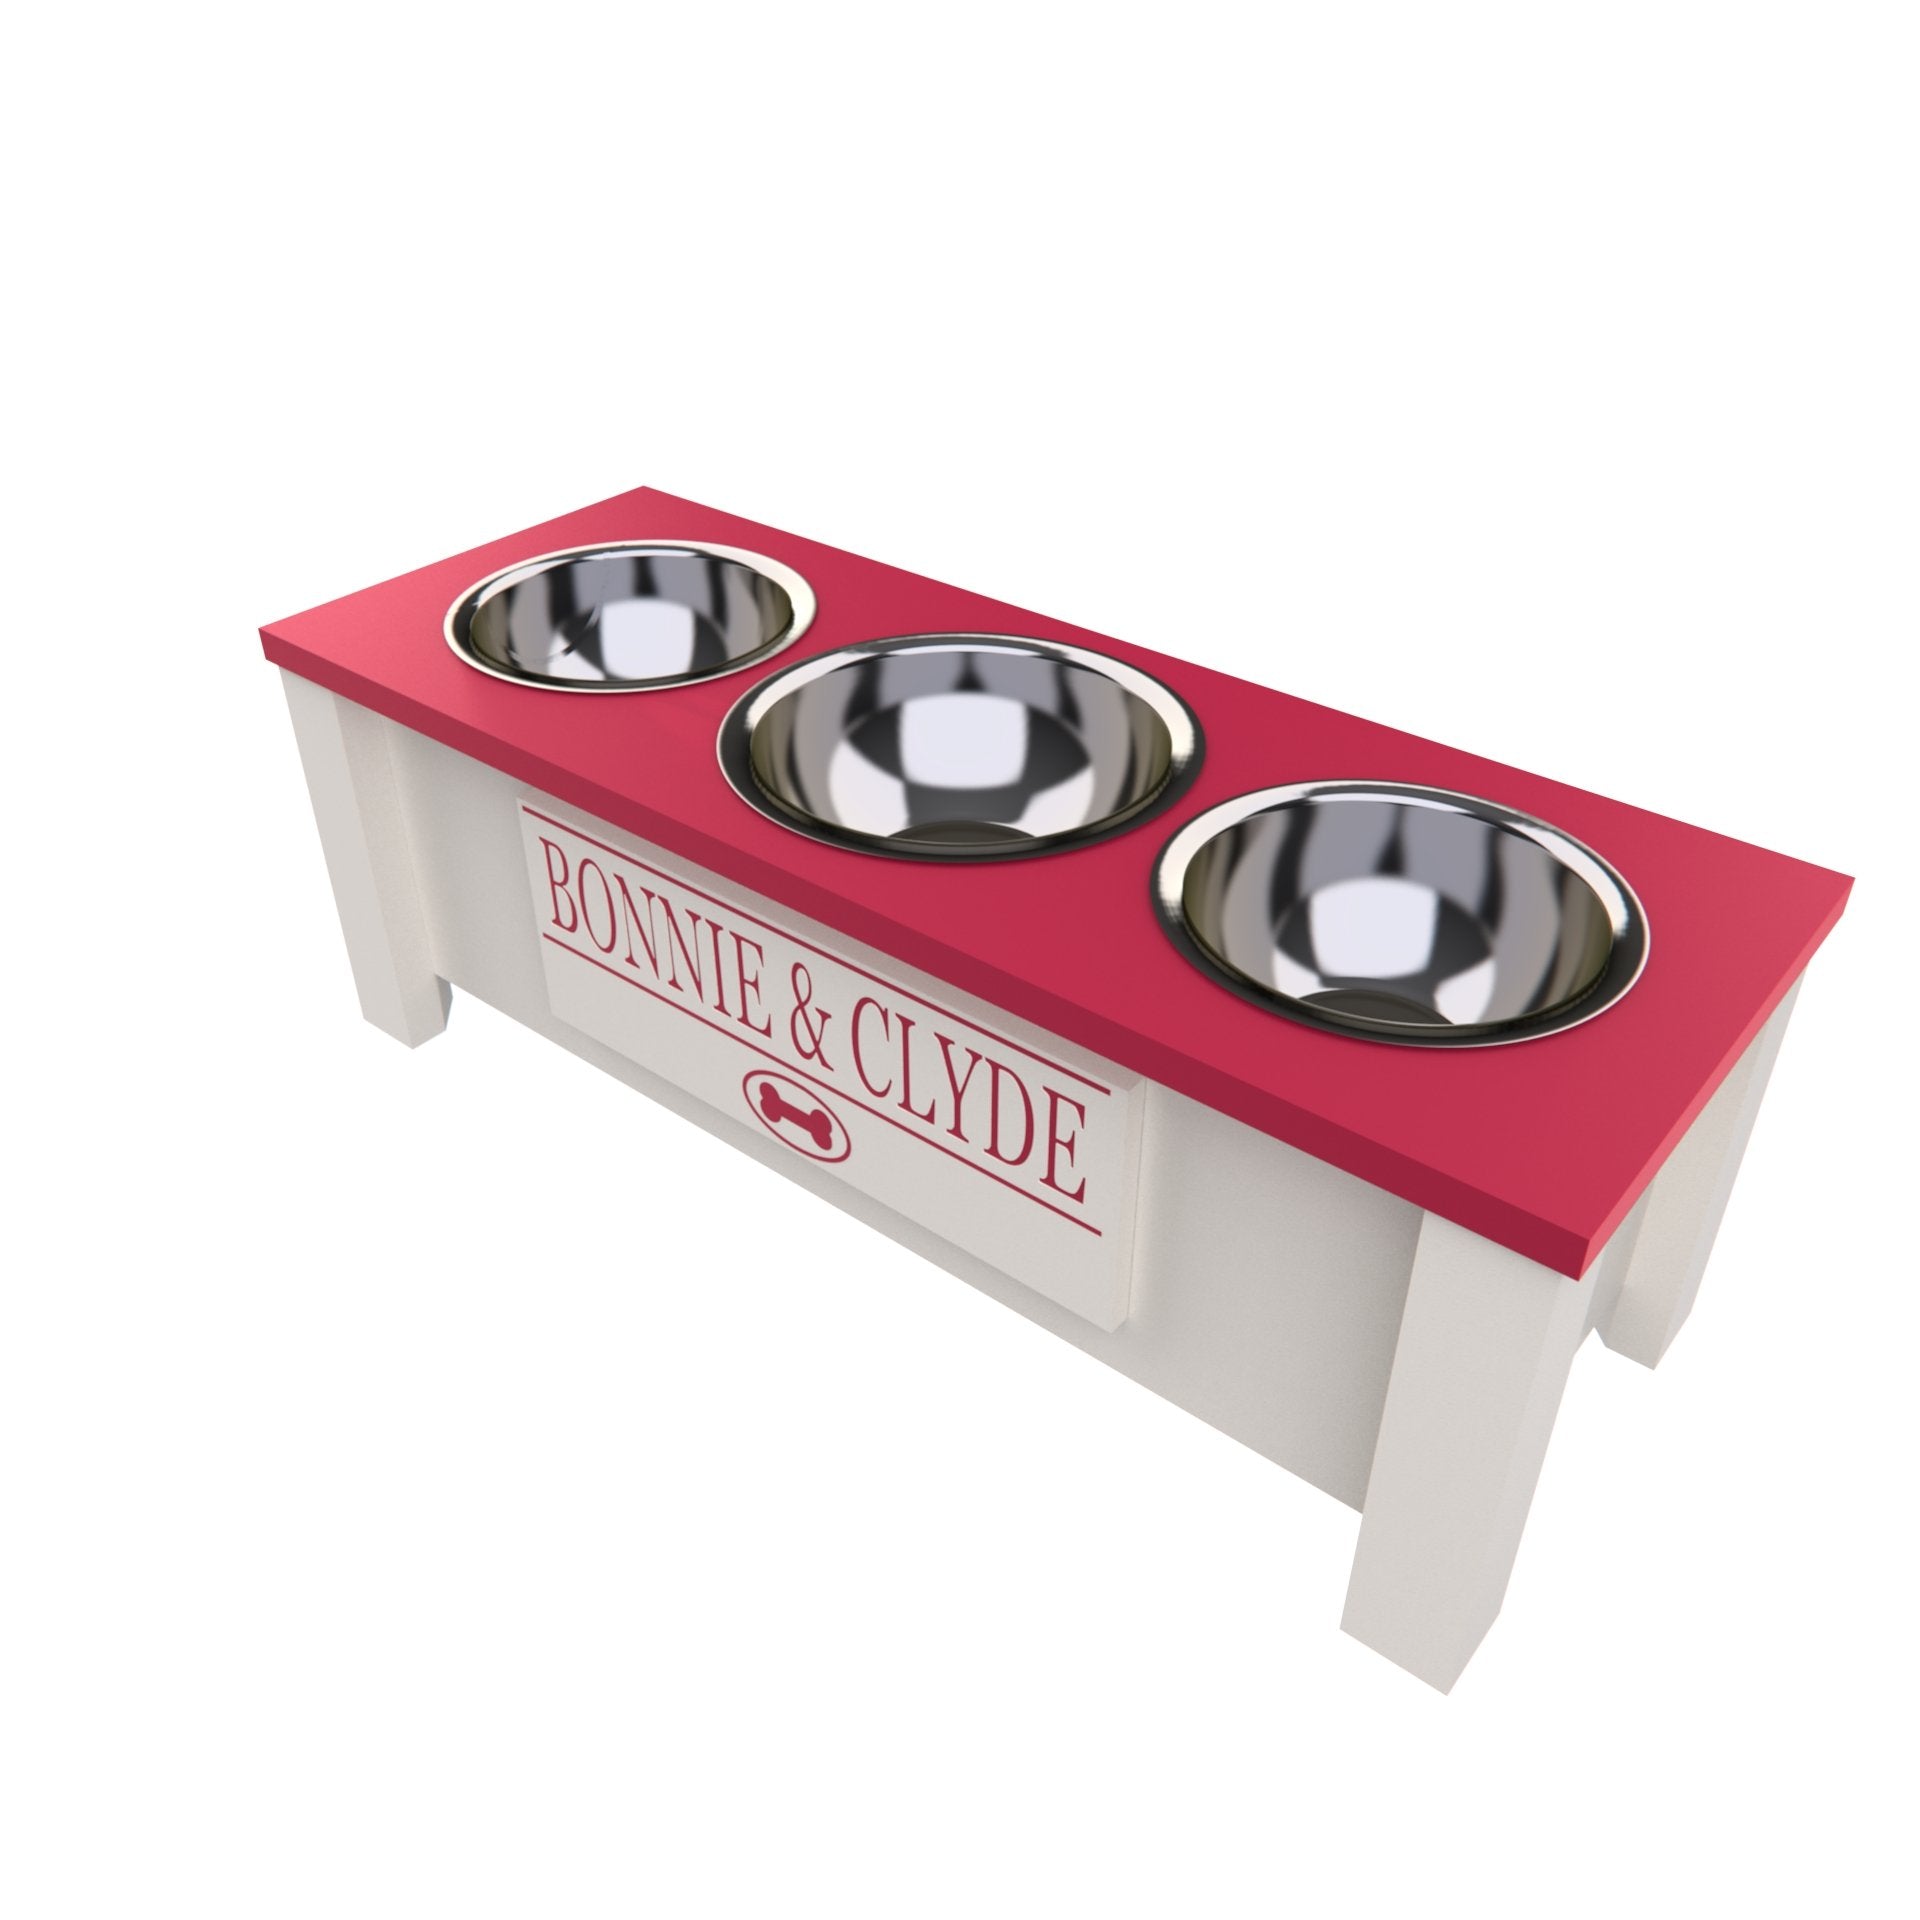 Personalized 3 Bowl Elevated Dog Feeder in Magenta - GrooveThis Woodshop - GT006MAG-M